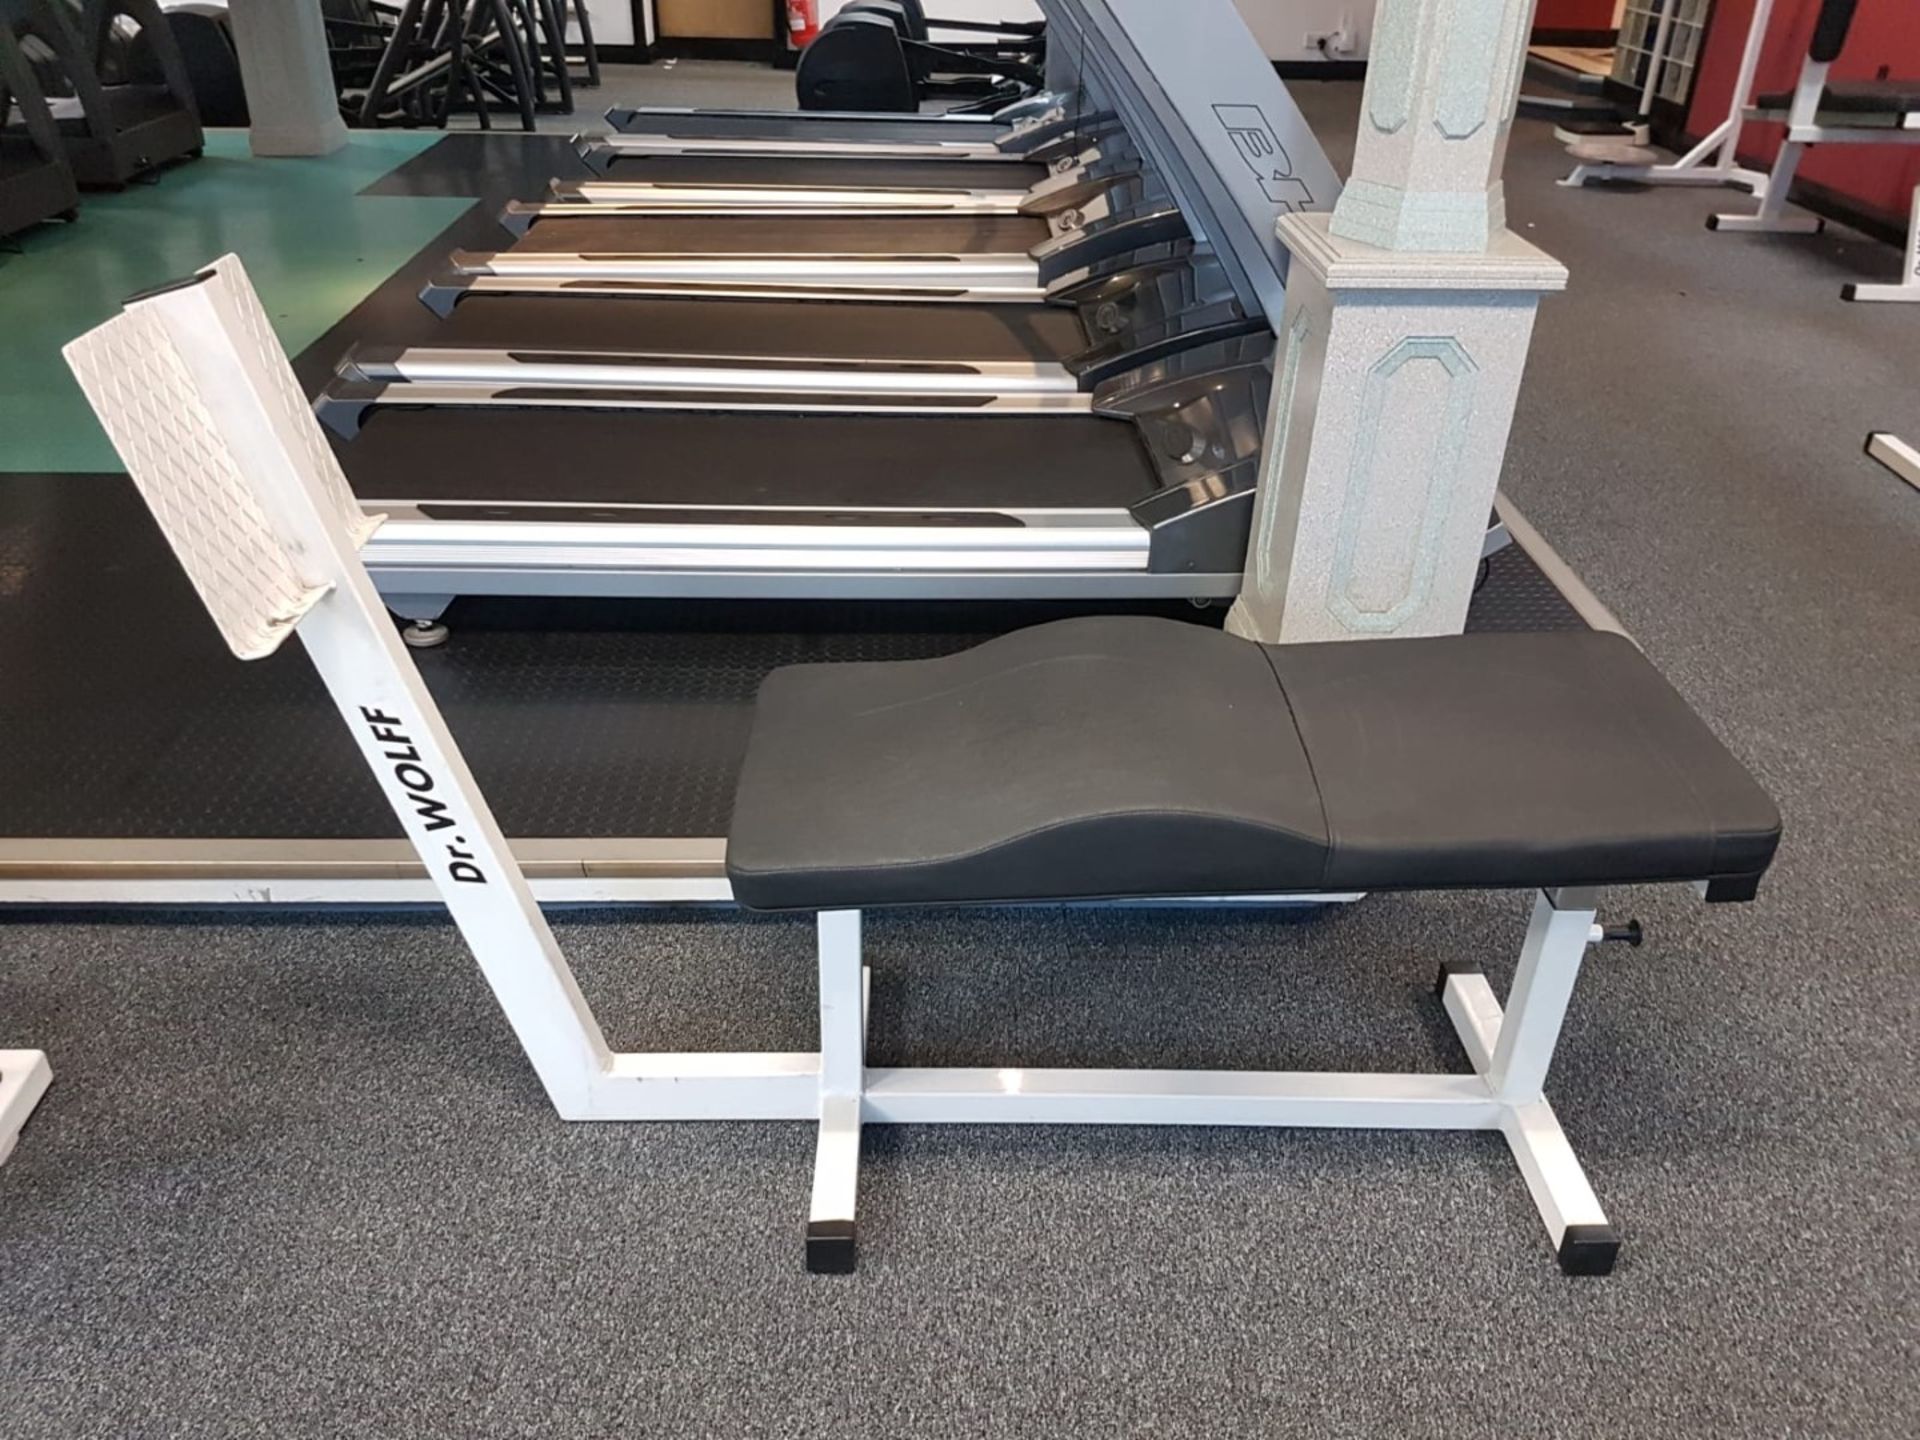 1 x Dr.Wolff Abdominal Fitness Bench - Dimensions: L150 x W45 x H110cm - Ref: J2064/1FG - CL356 - - Image 2 of 3